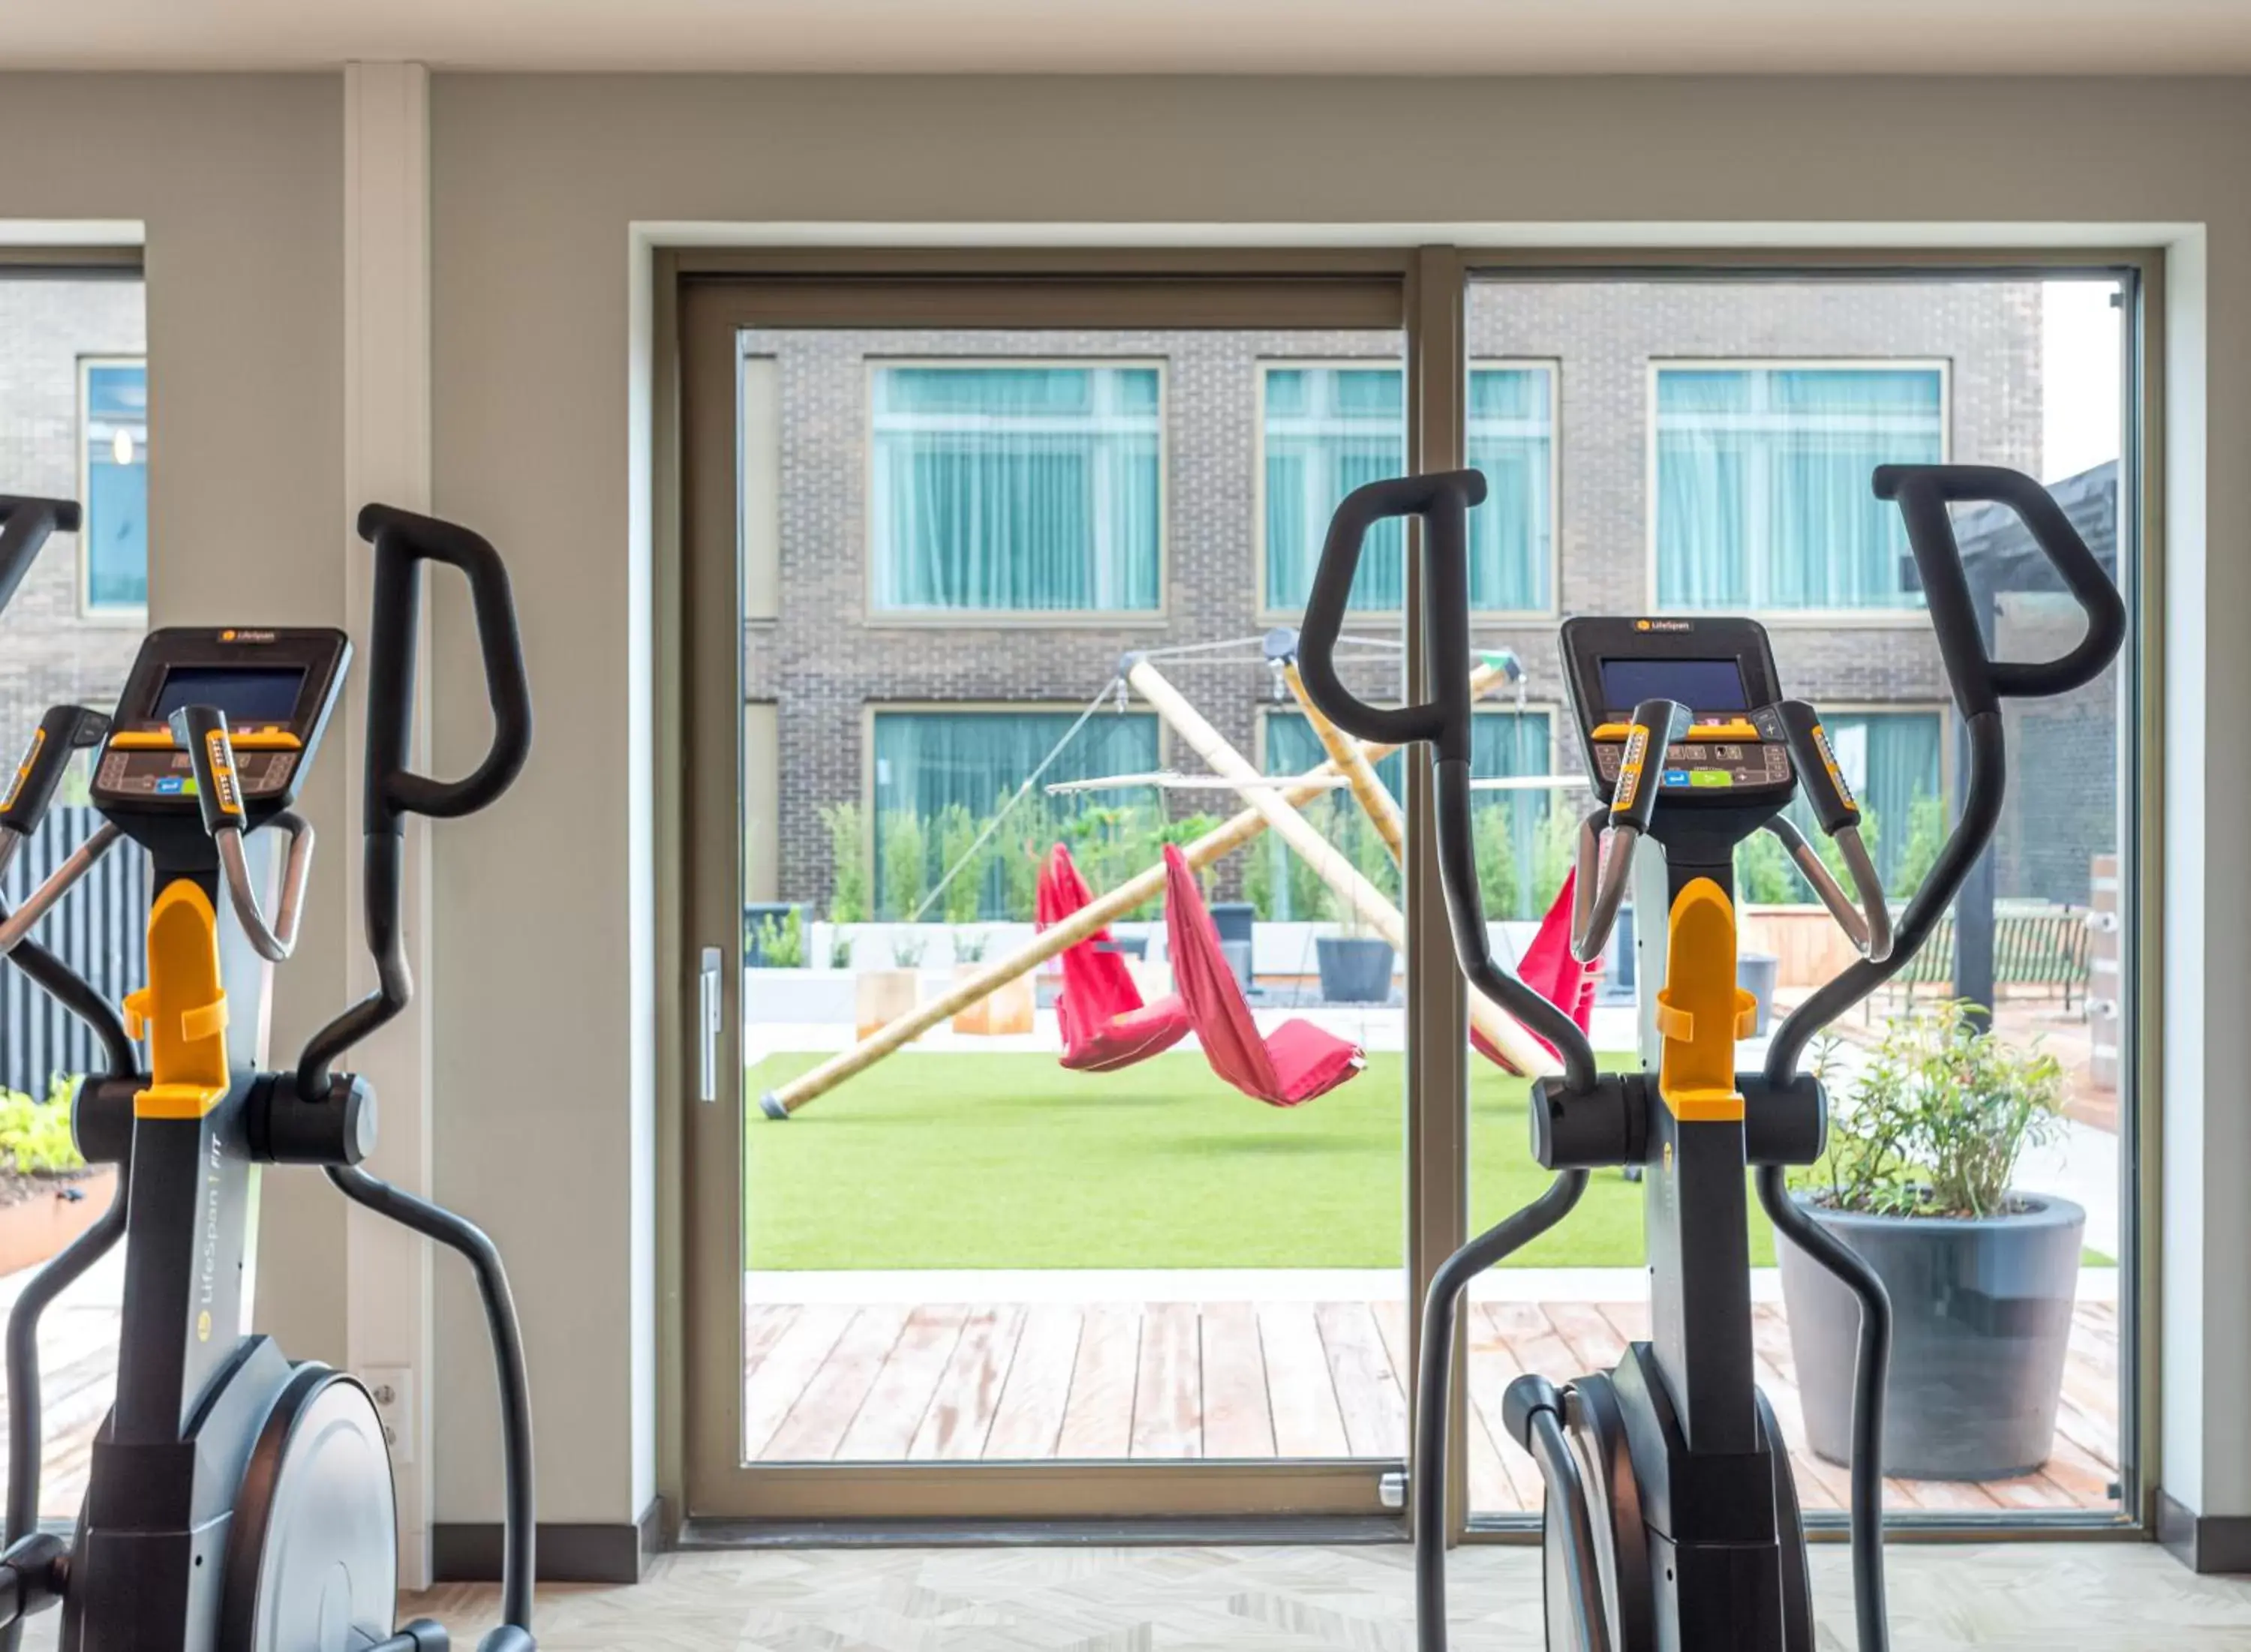 Fitness centre/facilities, Fitness Center/Facilities in Olympic Hotel